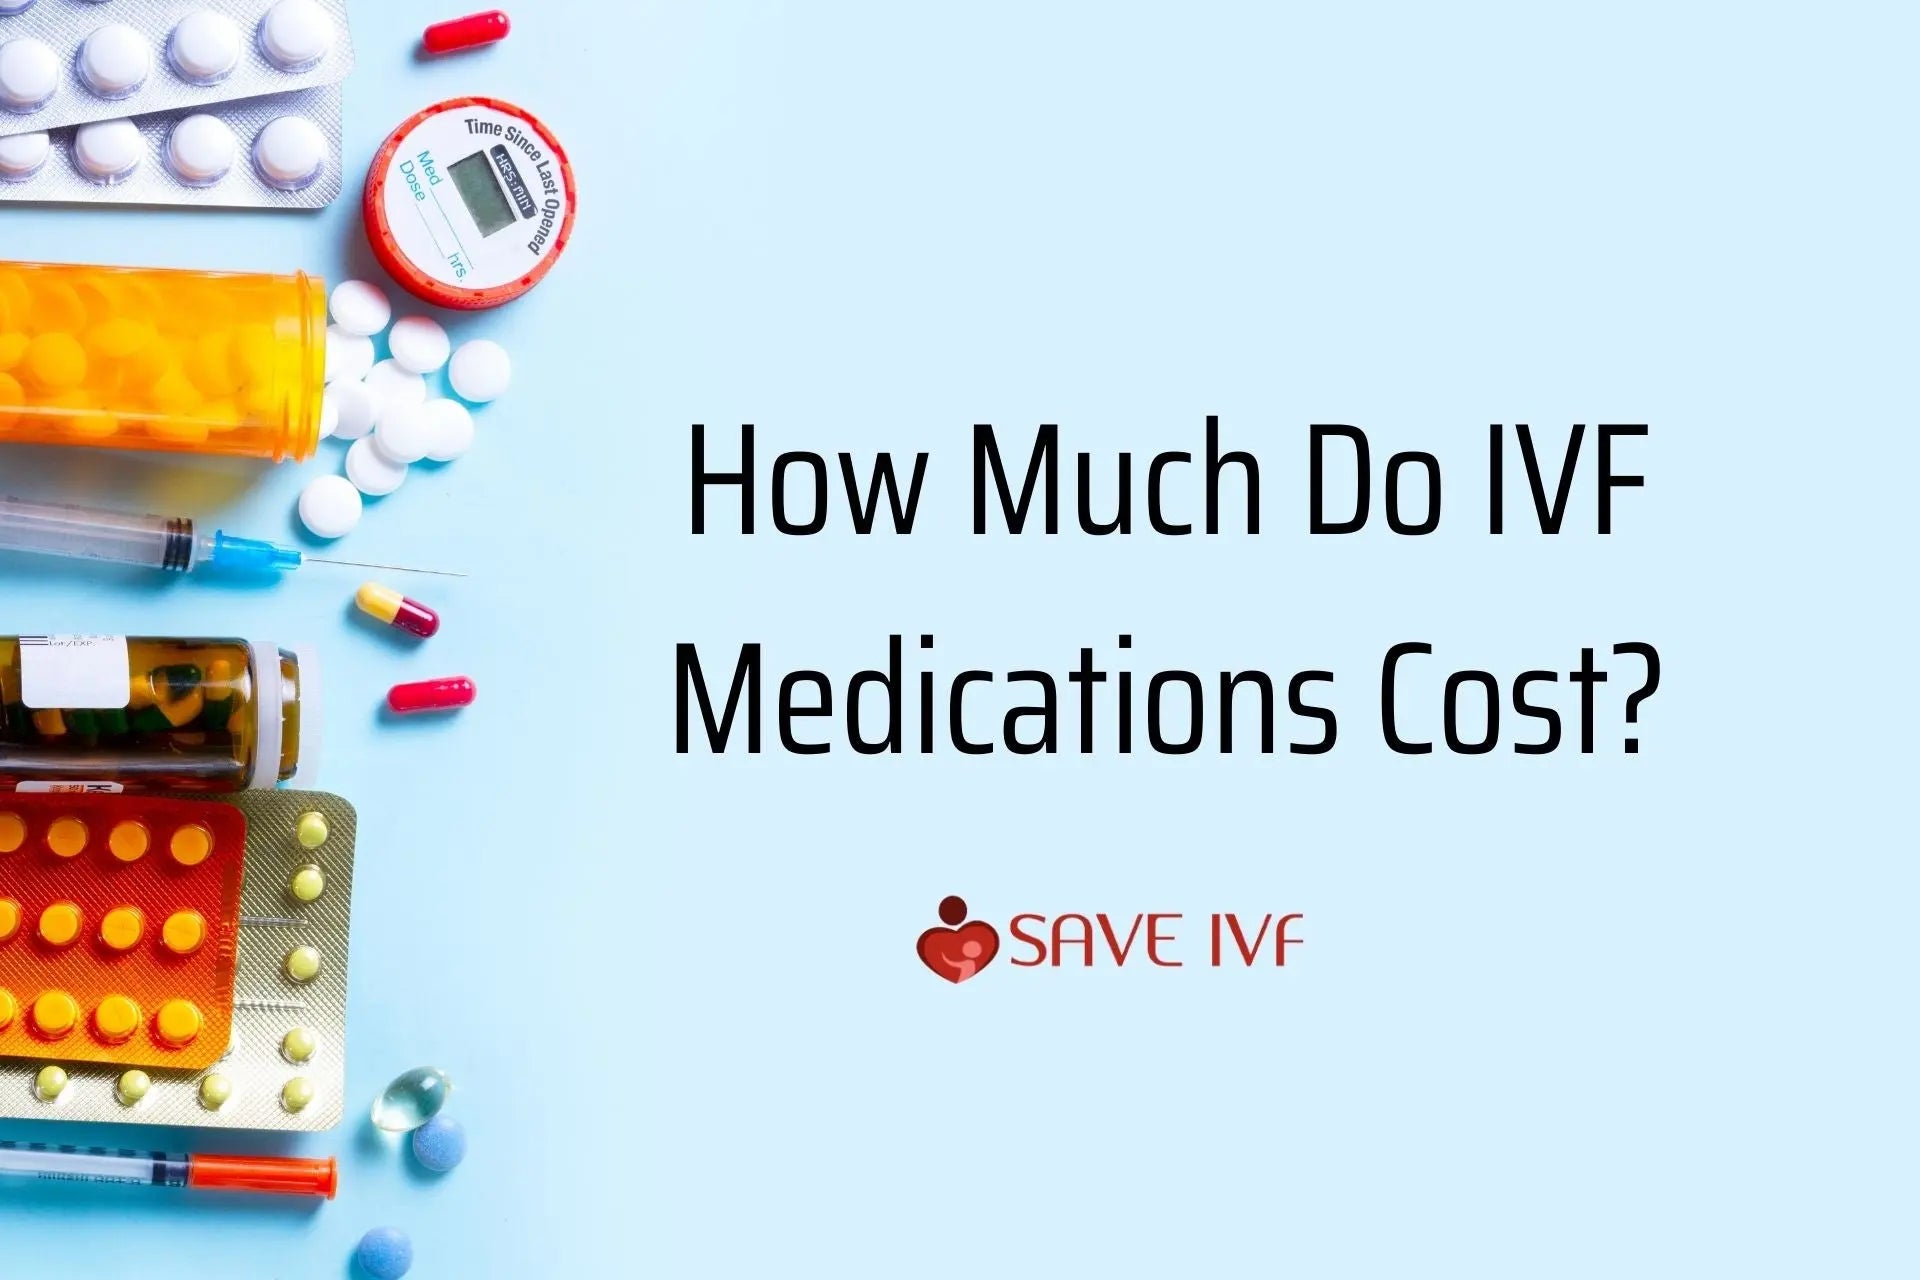 SaveIVF | How Much Do IVF Medications Cost? Save IVF